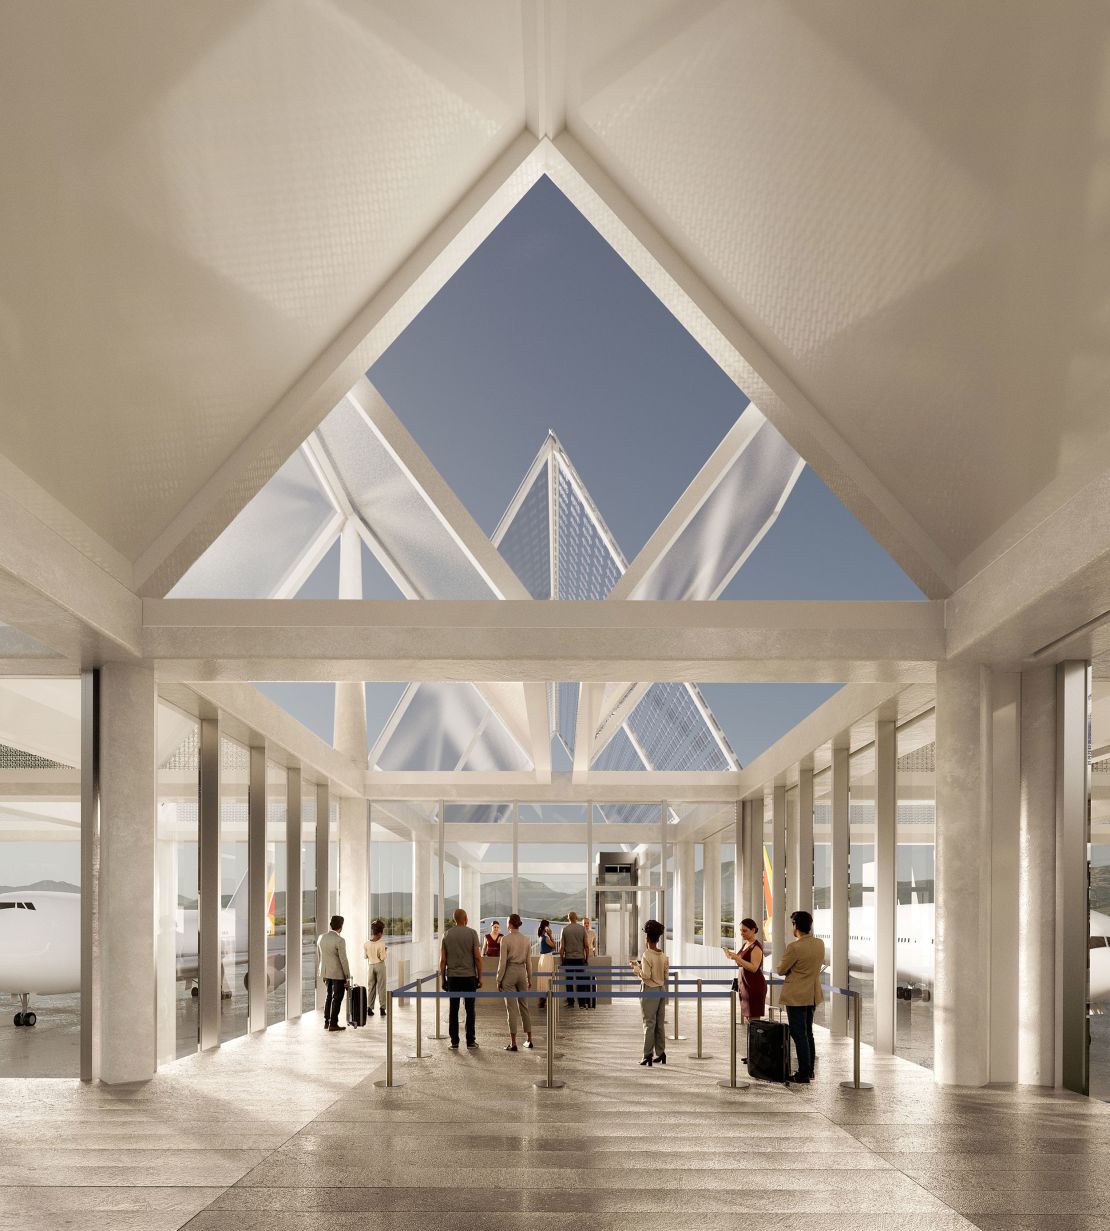 The new passenger terminal will be built by 2026 or 2027.